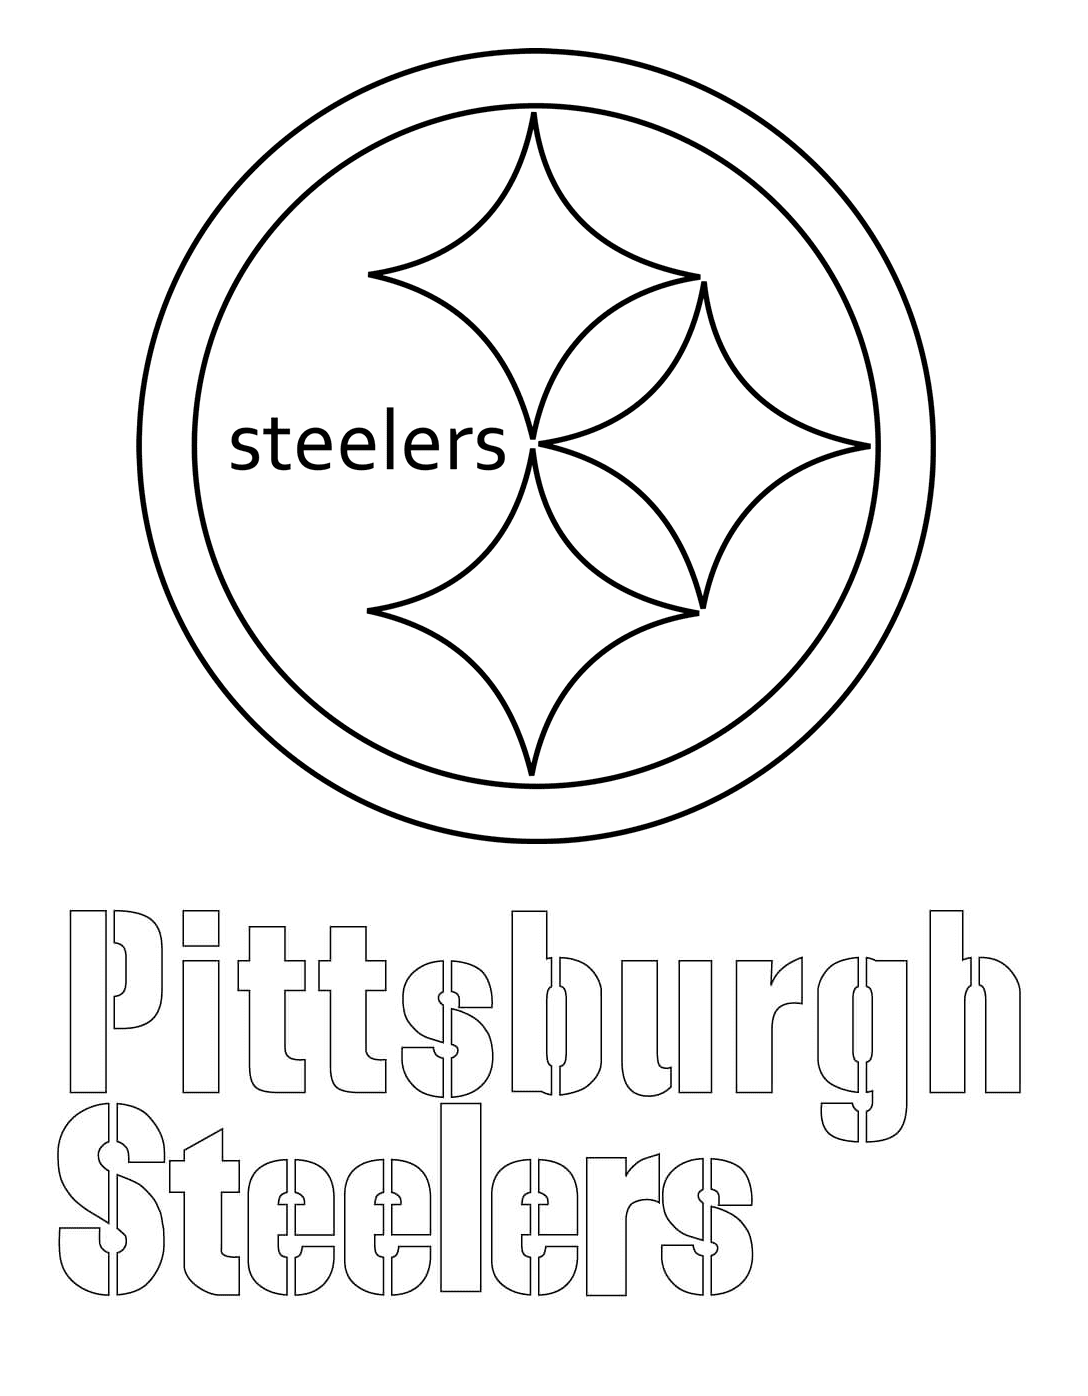 Pittsburgh Steelers Logo from NFL